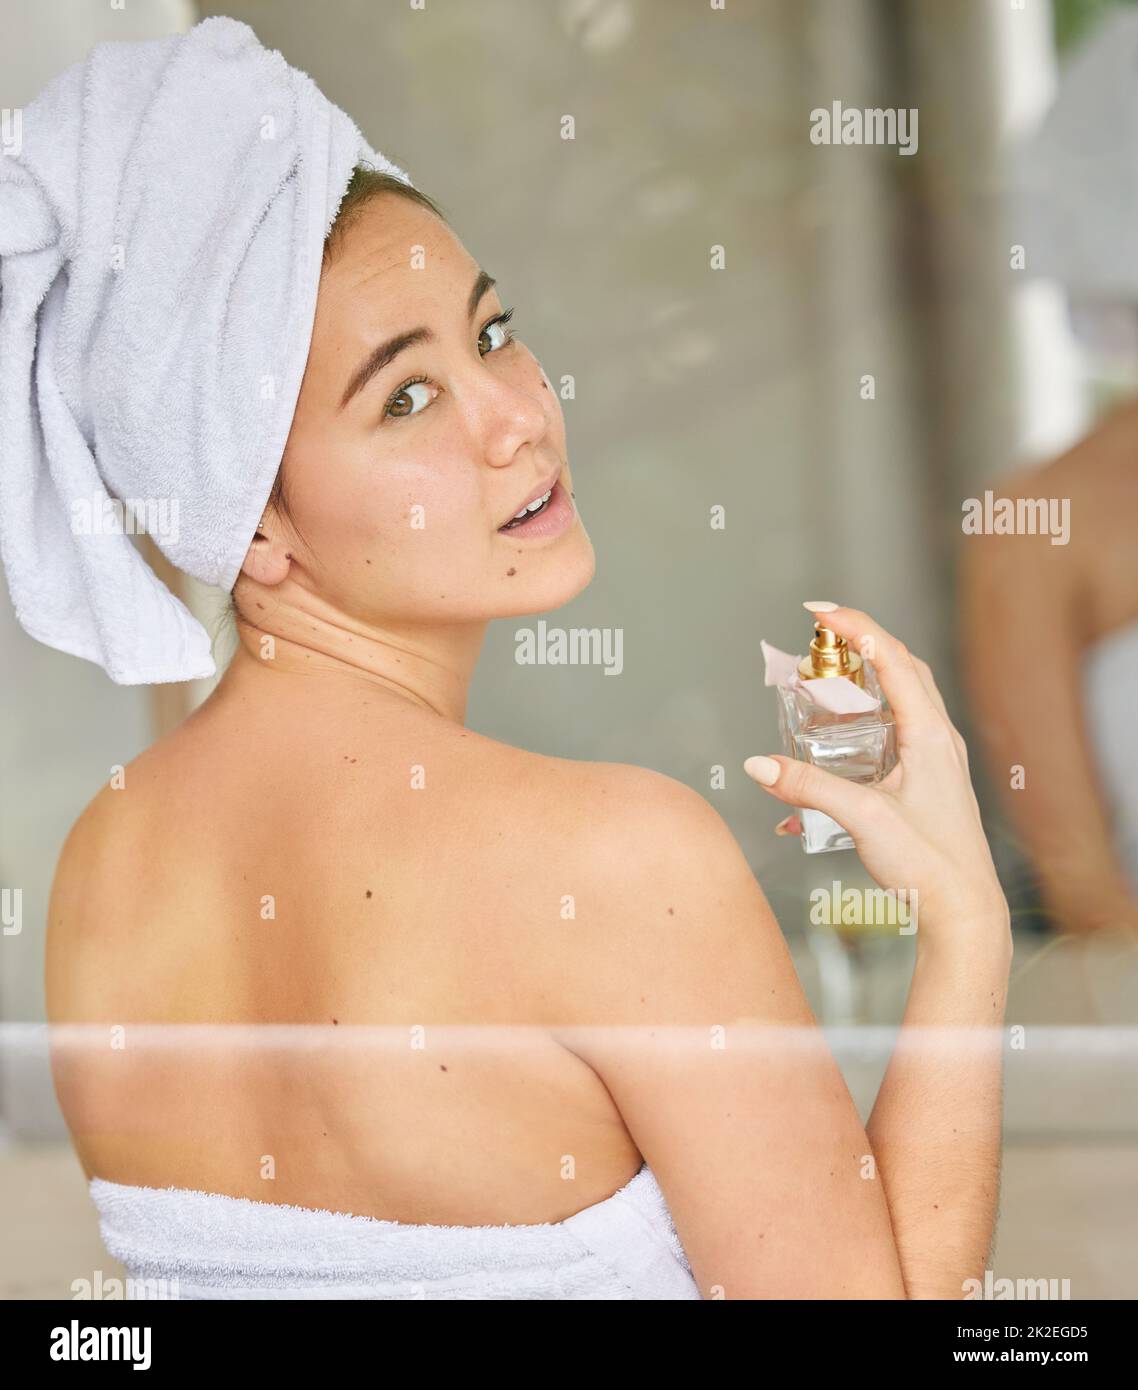 Self care makes me feel amazing. Shot of a young woman spraying perfume during her morning beauty routine. Stock Photo